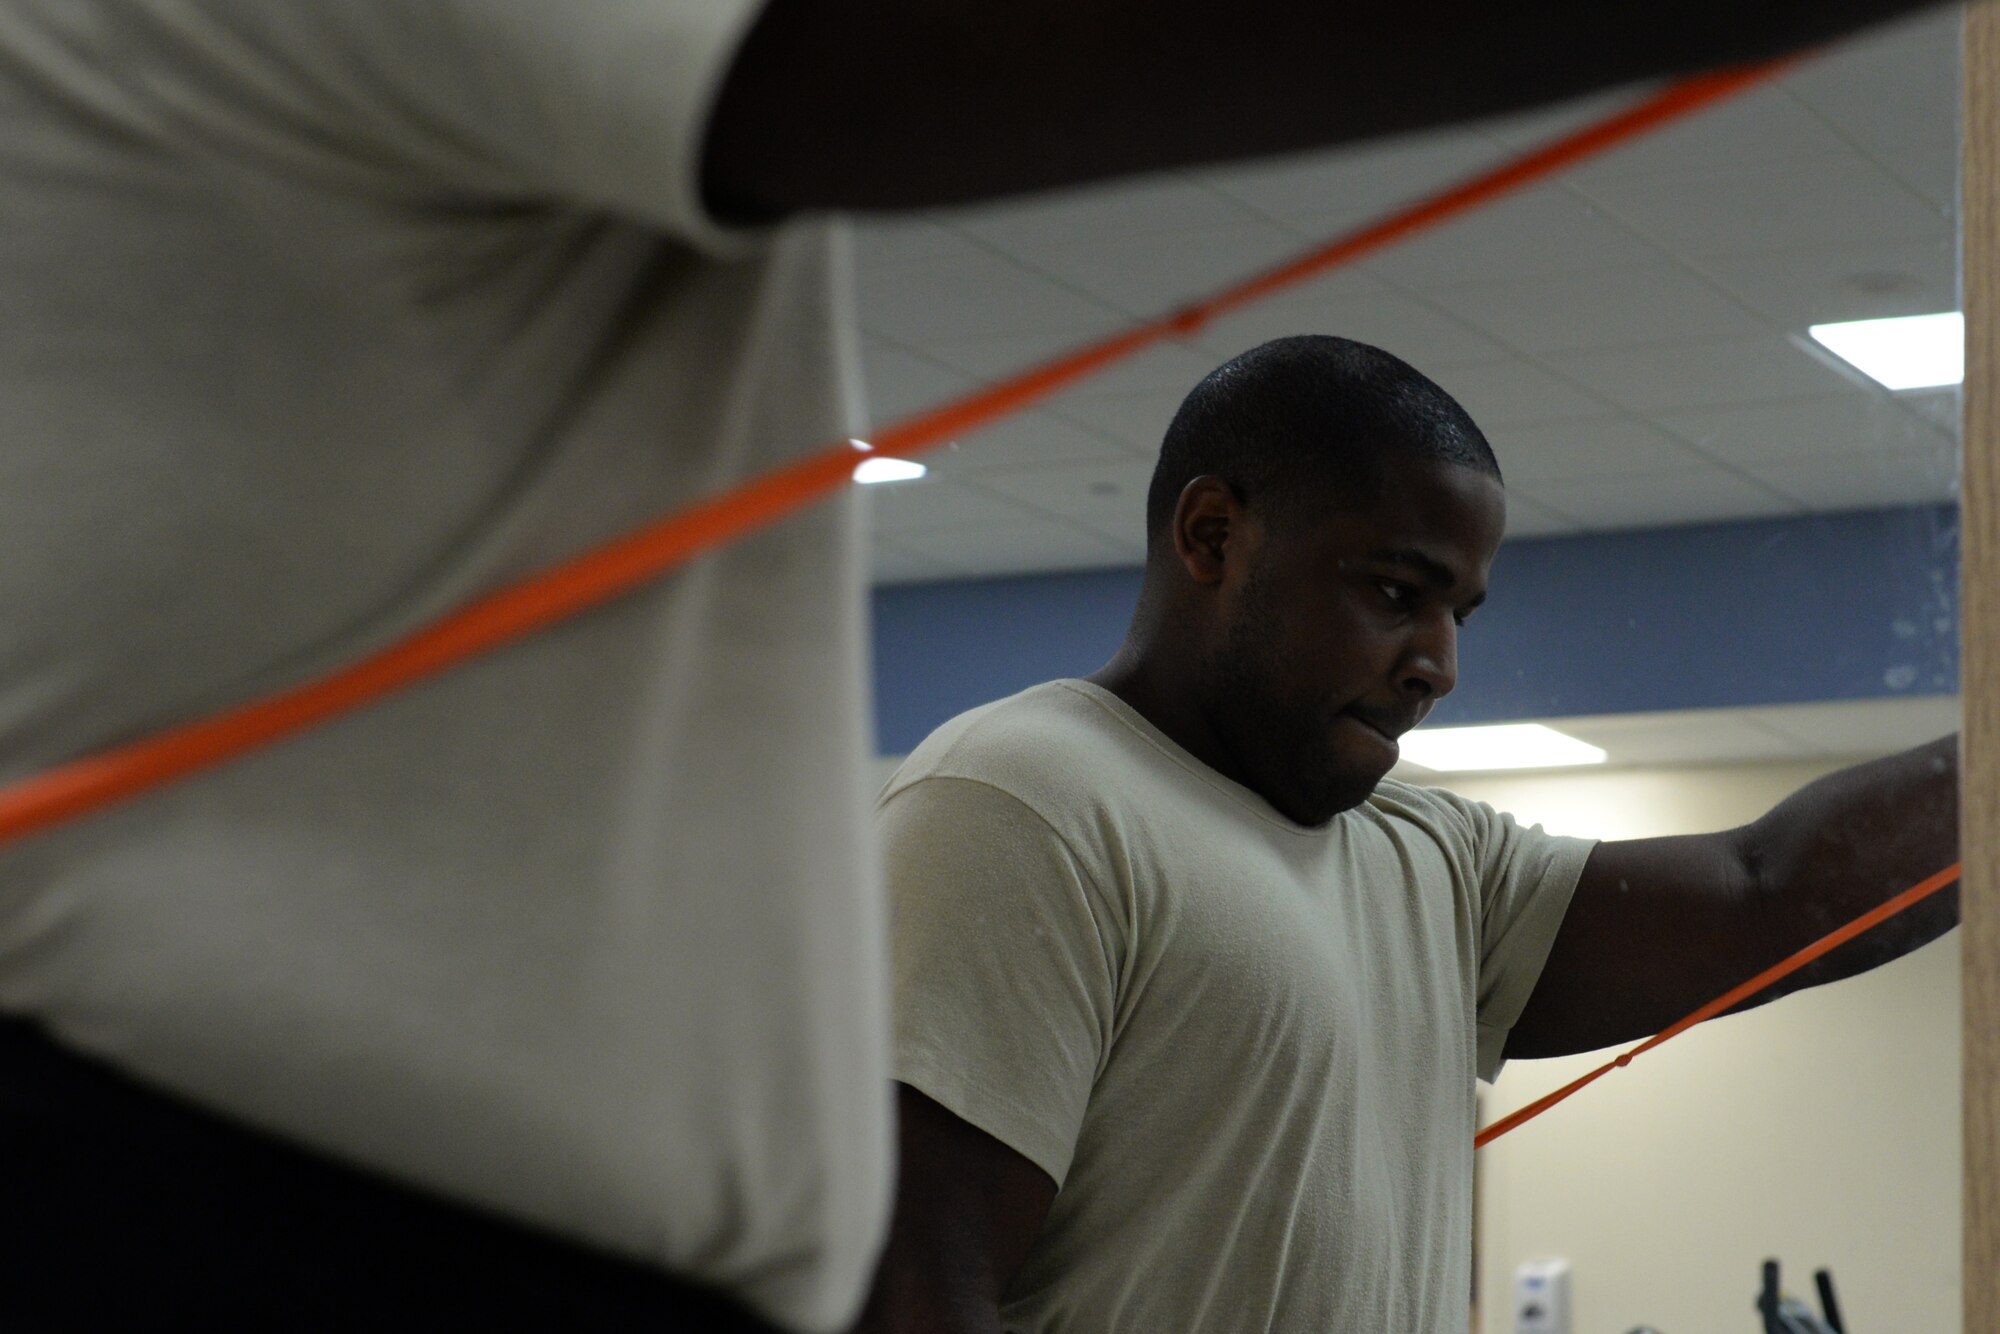 Tech. Sgt. Link Collier, 334th Training Squadron airfield management instructor supervisor, executes a front raise in the physical therapy department, April 6, 2016, Keesler Air Force Base, Miss. Performing a front (anterior) raise with a resistance band helps build strength in Collier’s injured shoulder. The exercise is performed on both sides in order to maintain balance. (Air Force Photo by Airman 1st Class Travis Beihl)